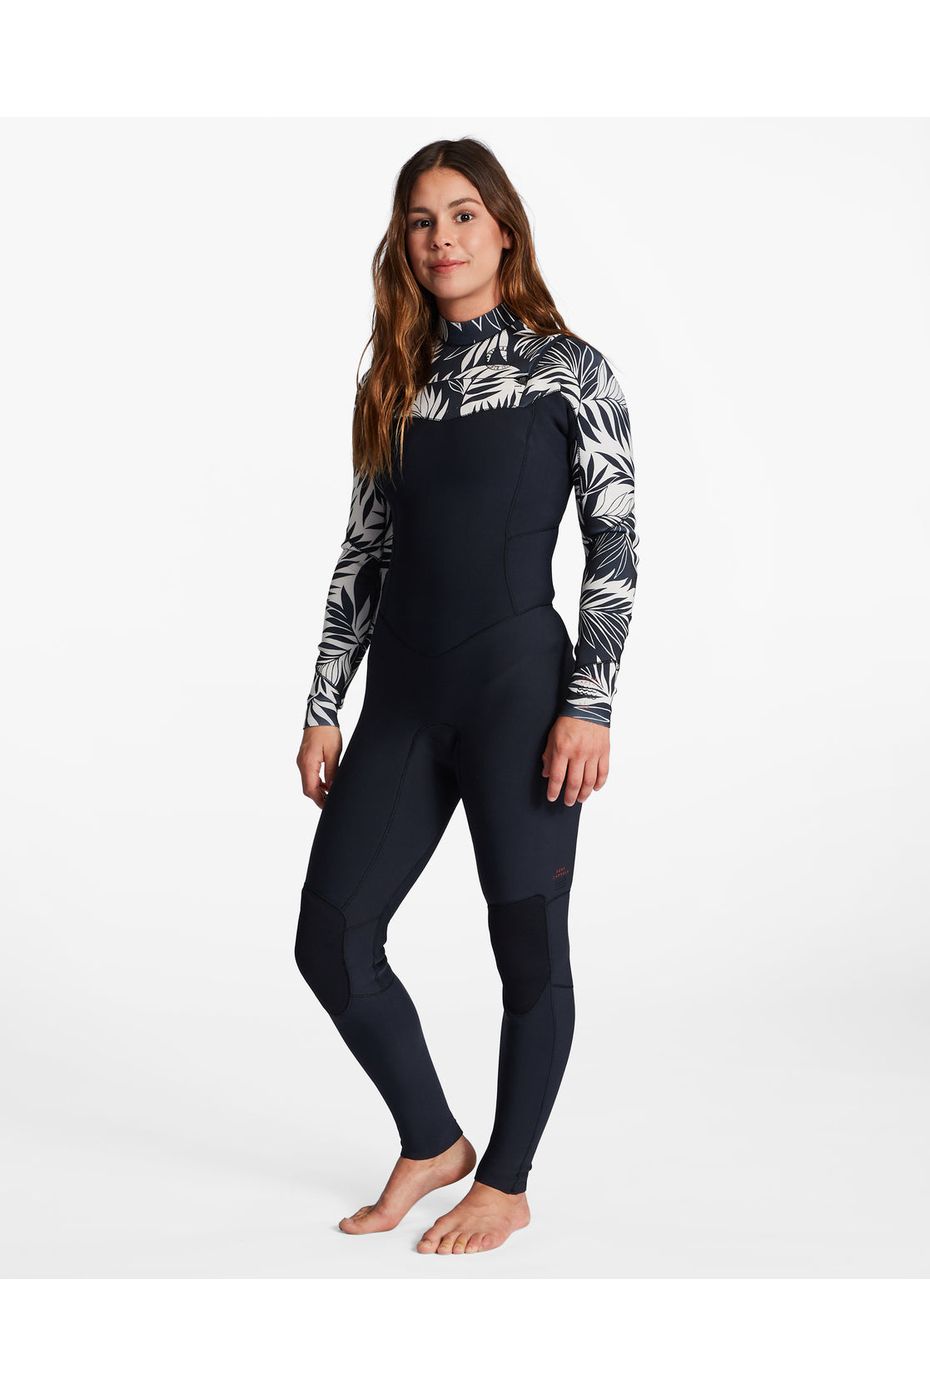 Billabong 3/2 Salty Dayz Wetsuit In Paradise